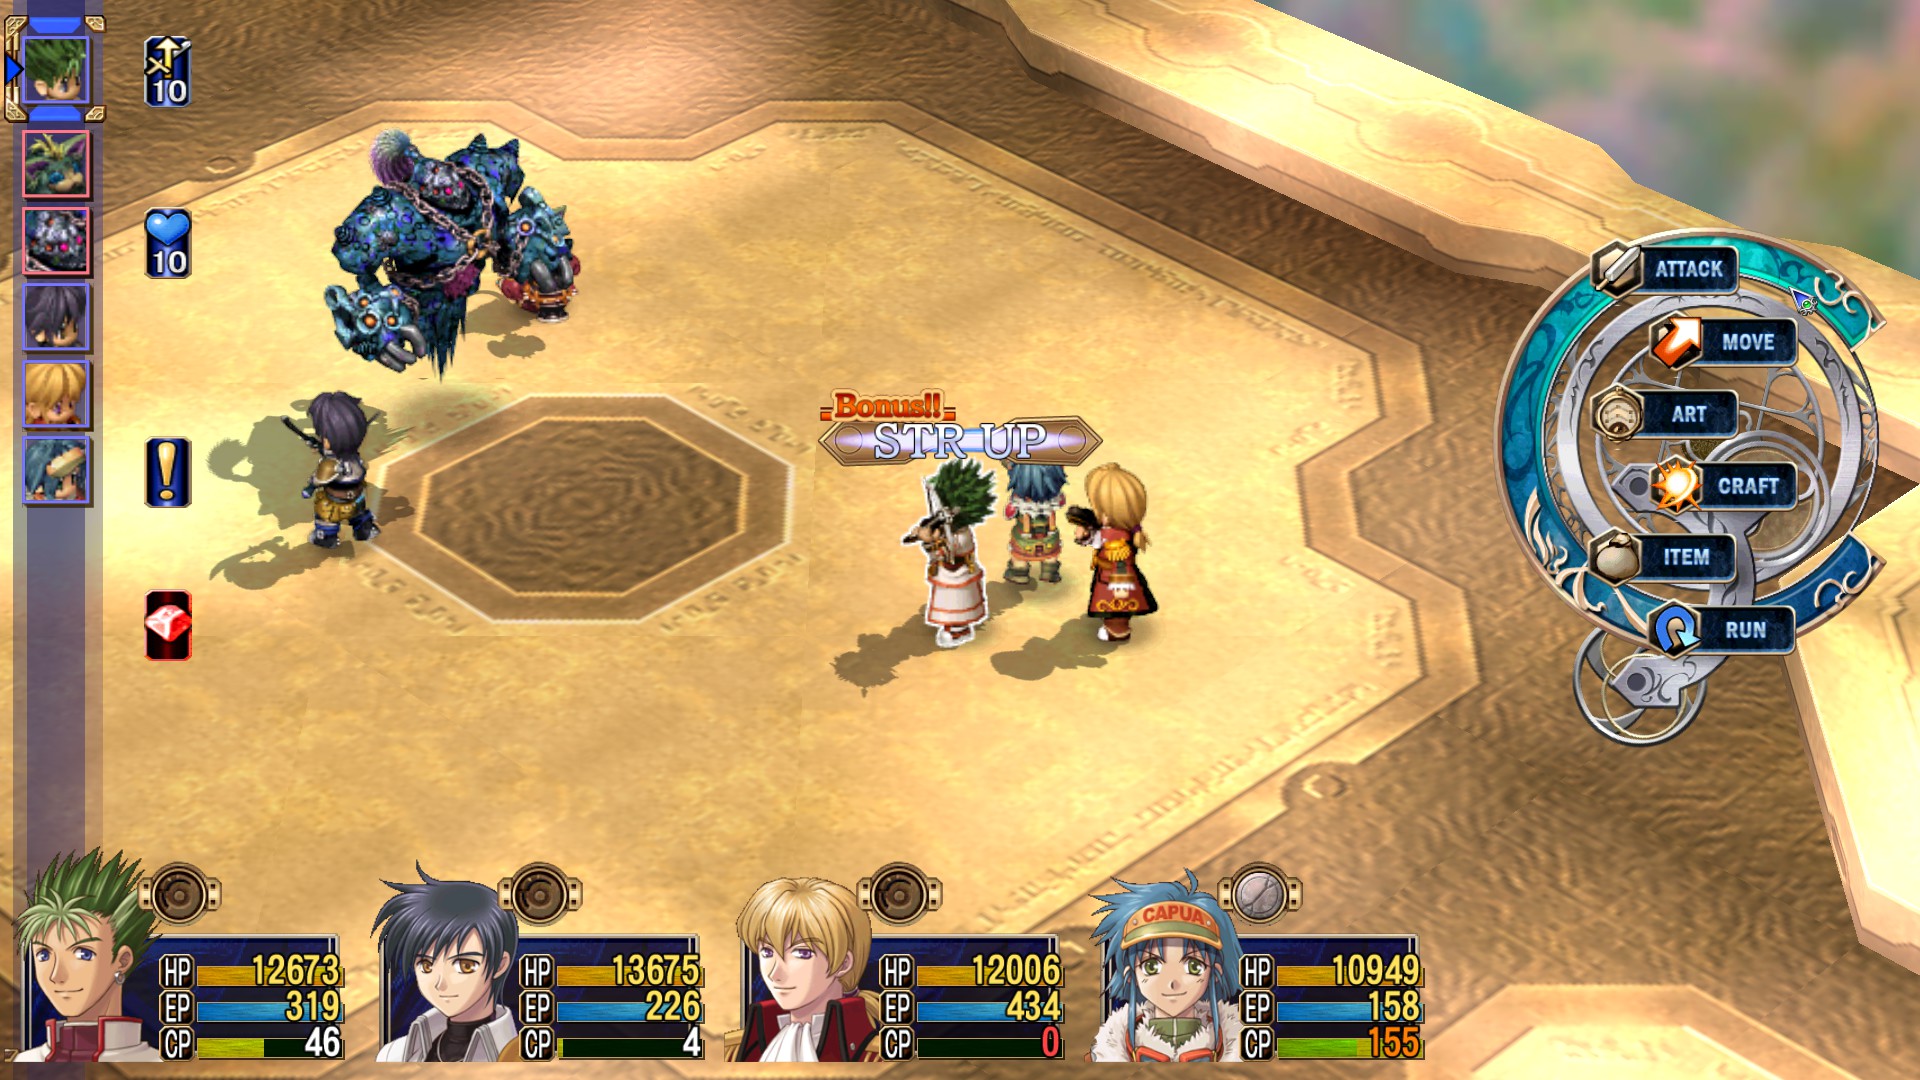 The Legend of Heroes: Trails in the Sky - Metacritic